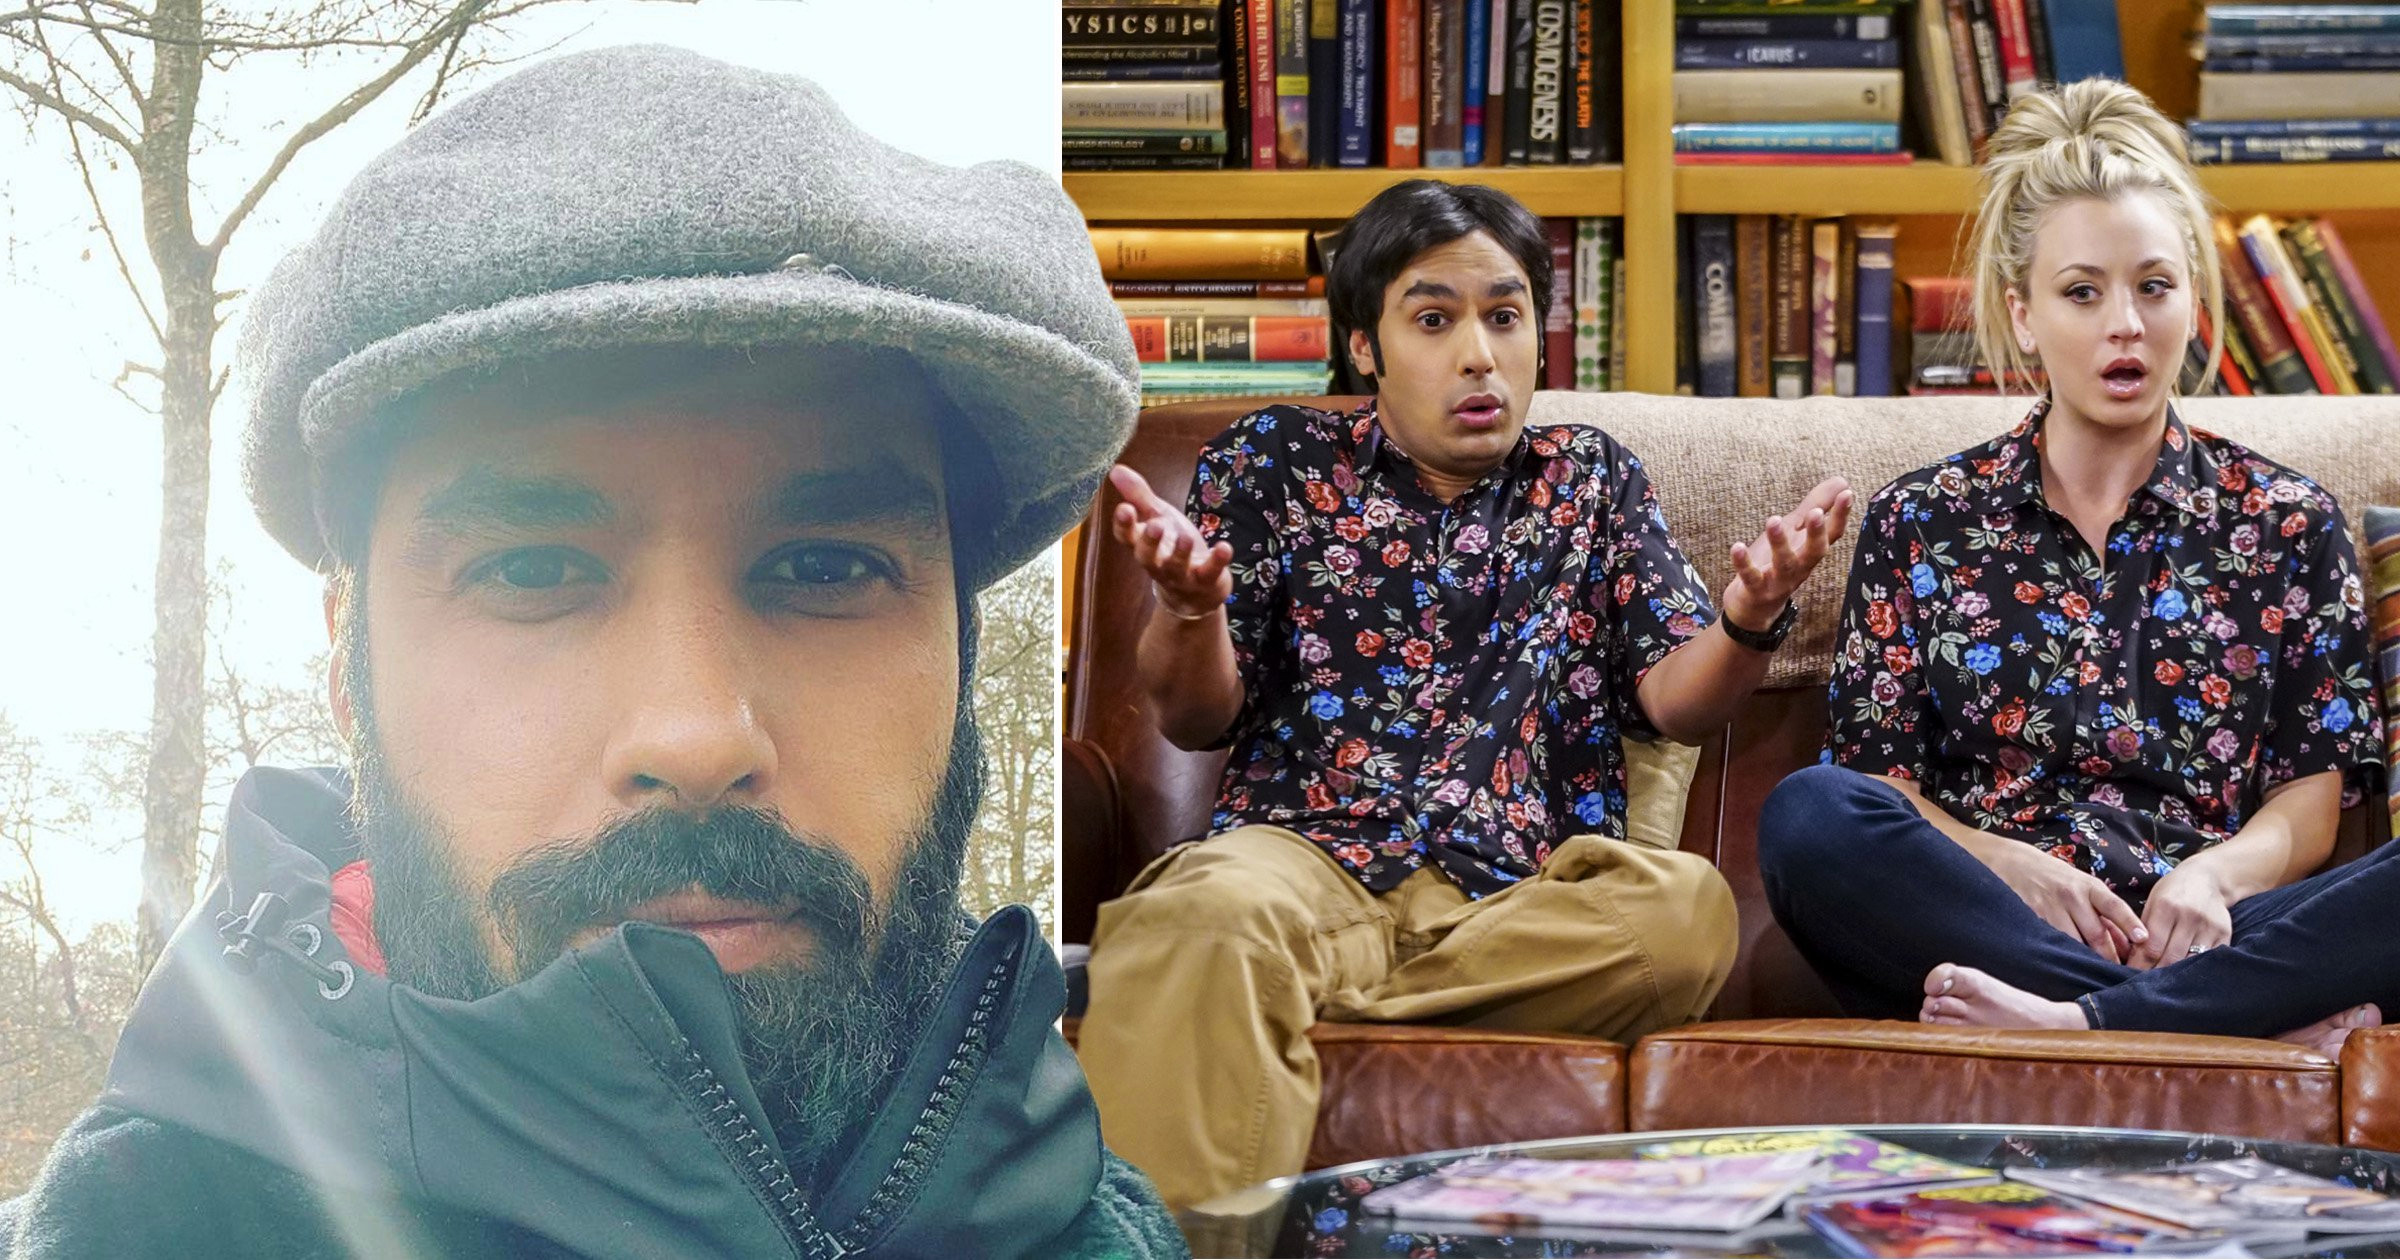 The Big Bang Theory’s Kunal Nayyar posts touching message of support for fans: ‘You exist and you matter’